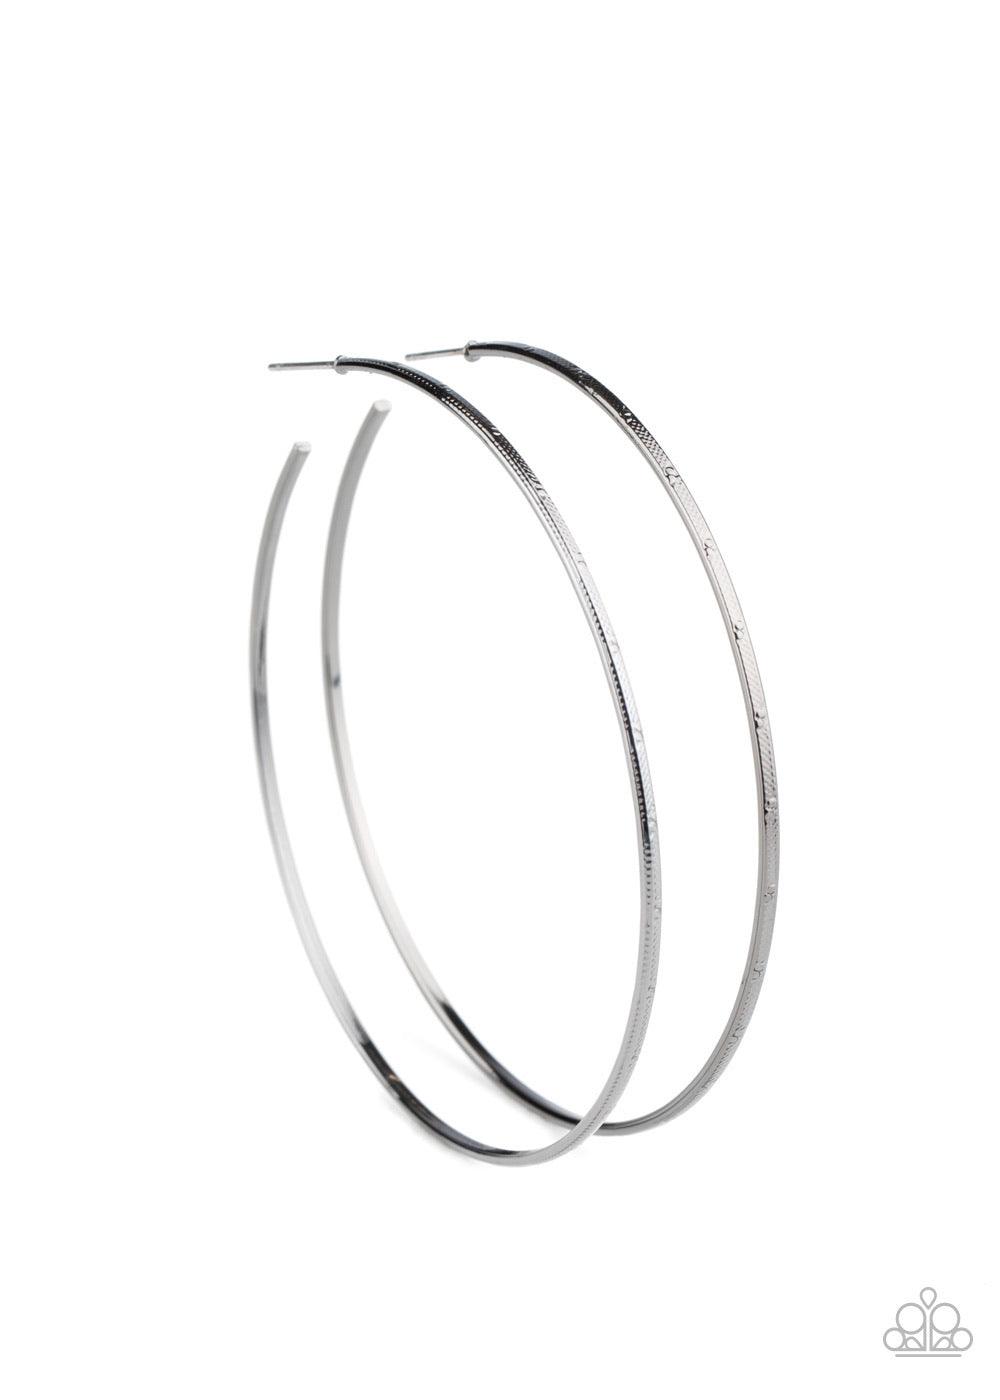 Paparazzi Accessories Very Curvaceous - Black Delicately hammered in a subtle shimmer, a glistening gunmetal wire dramatically curves into an oversized hoop for a flawless finish. Earring attaches to a standard post fitting. Hoop measures approximately 2